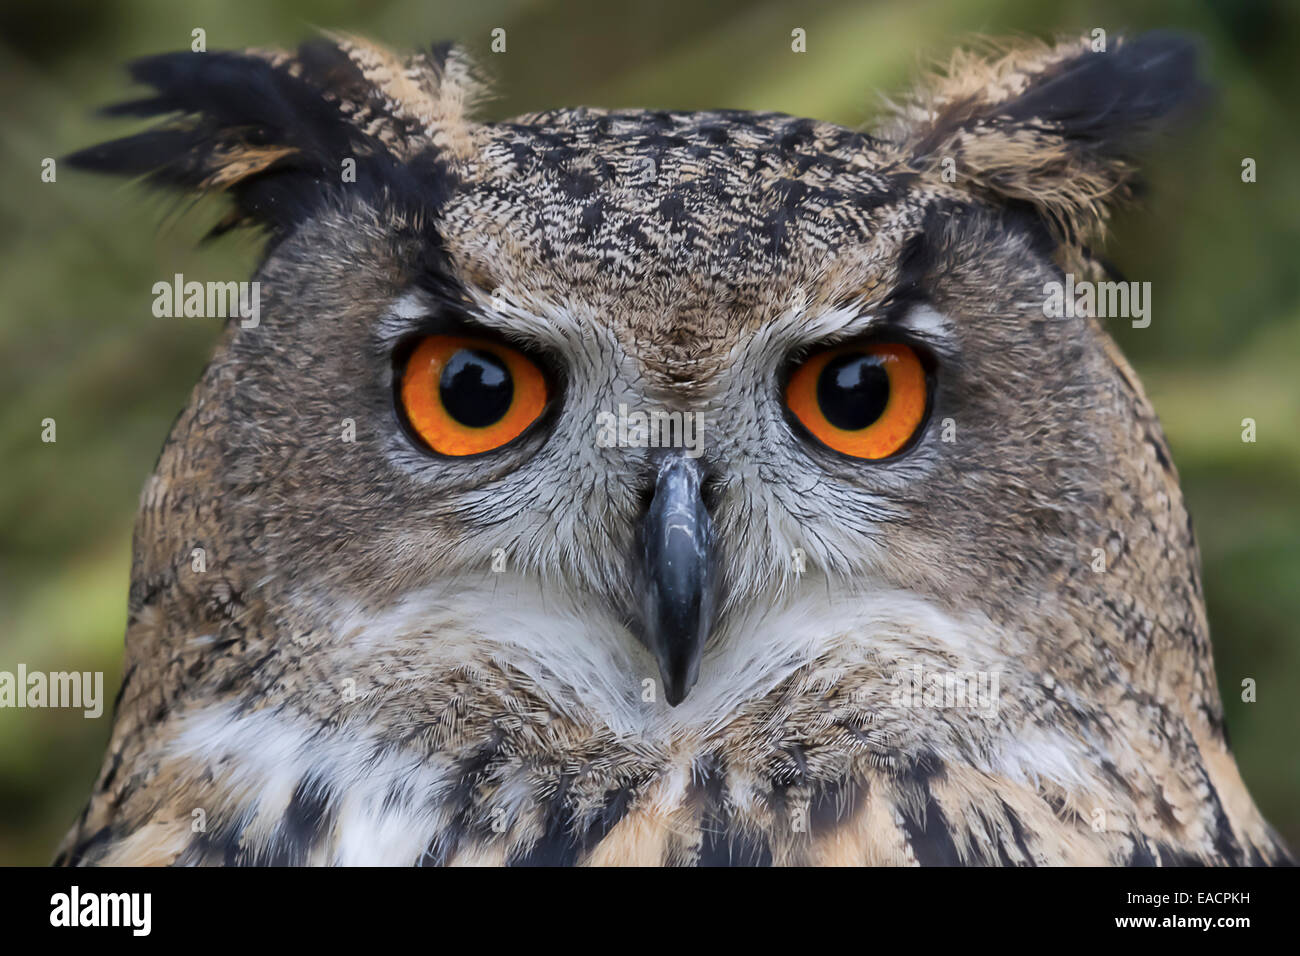 A detailed close up head photograph of an Eagle Owl Stock Photo